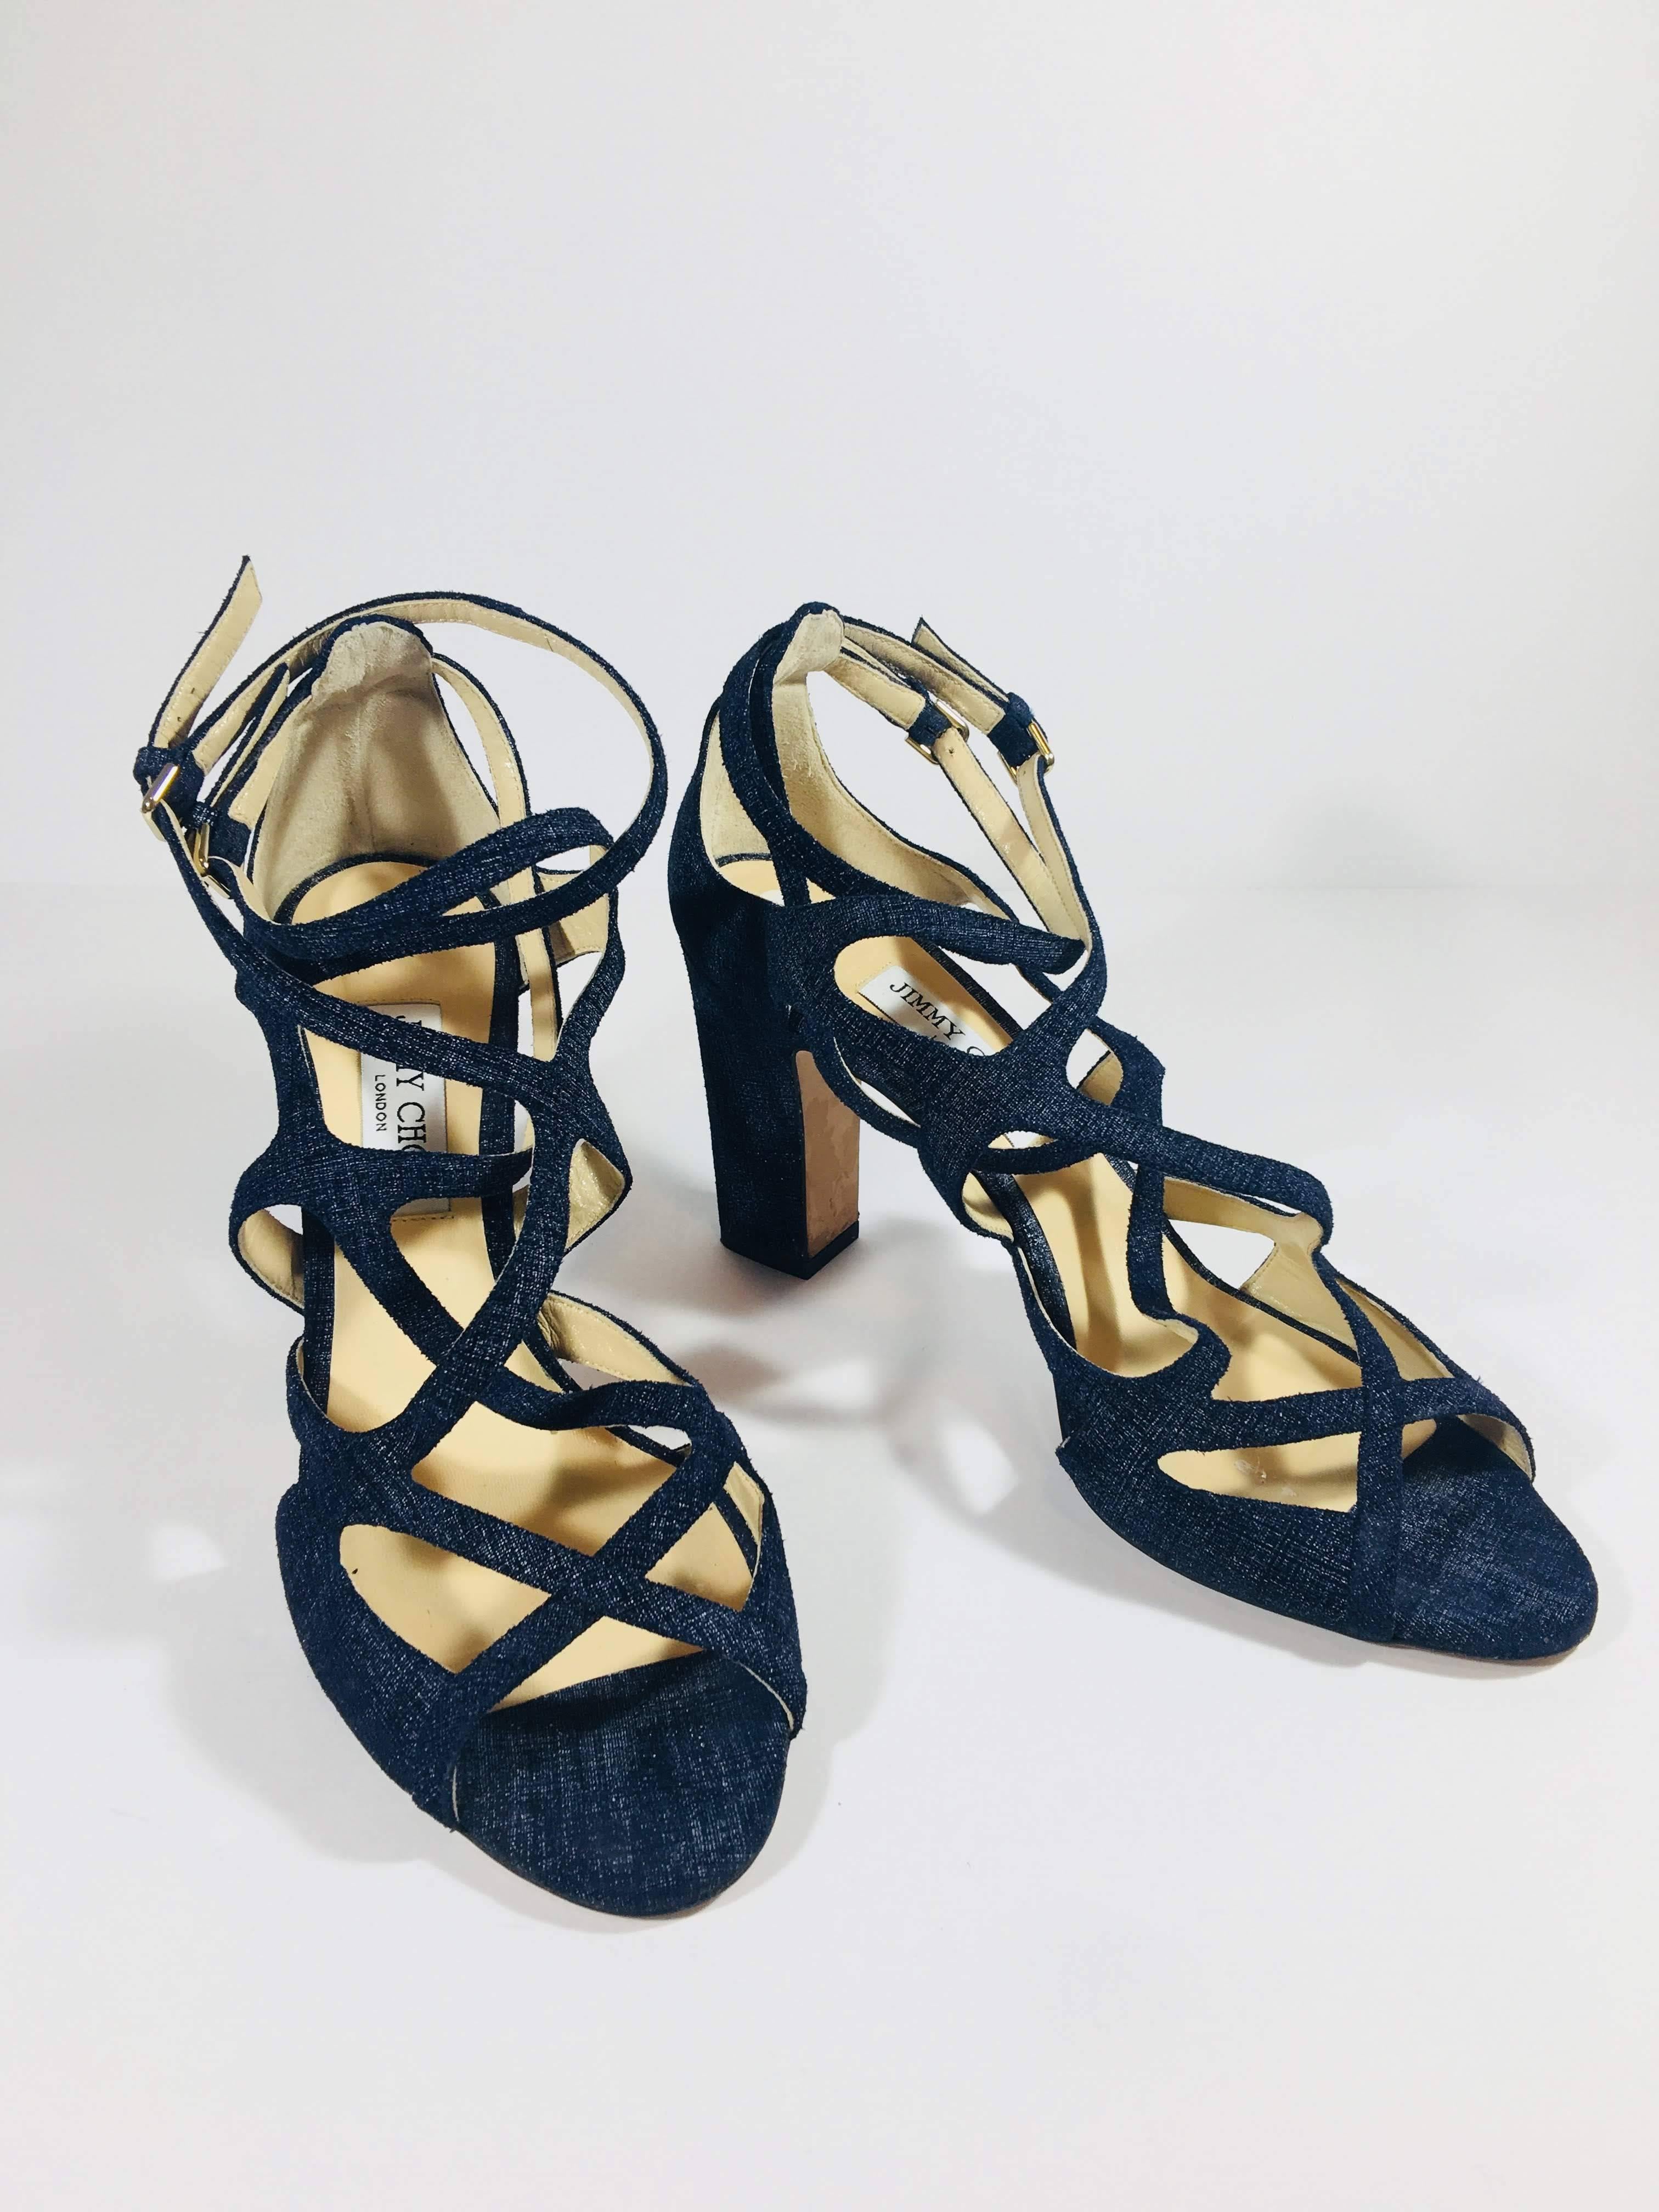 Jimmy Choo Cage Pumps in Dark Wash Denim with Open Toe,  Ankle Straps and Thick Stiletto Heel. Made in Italy, Size 42.